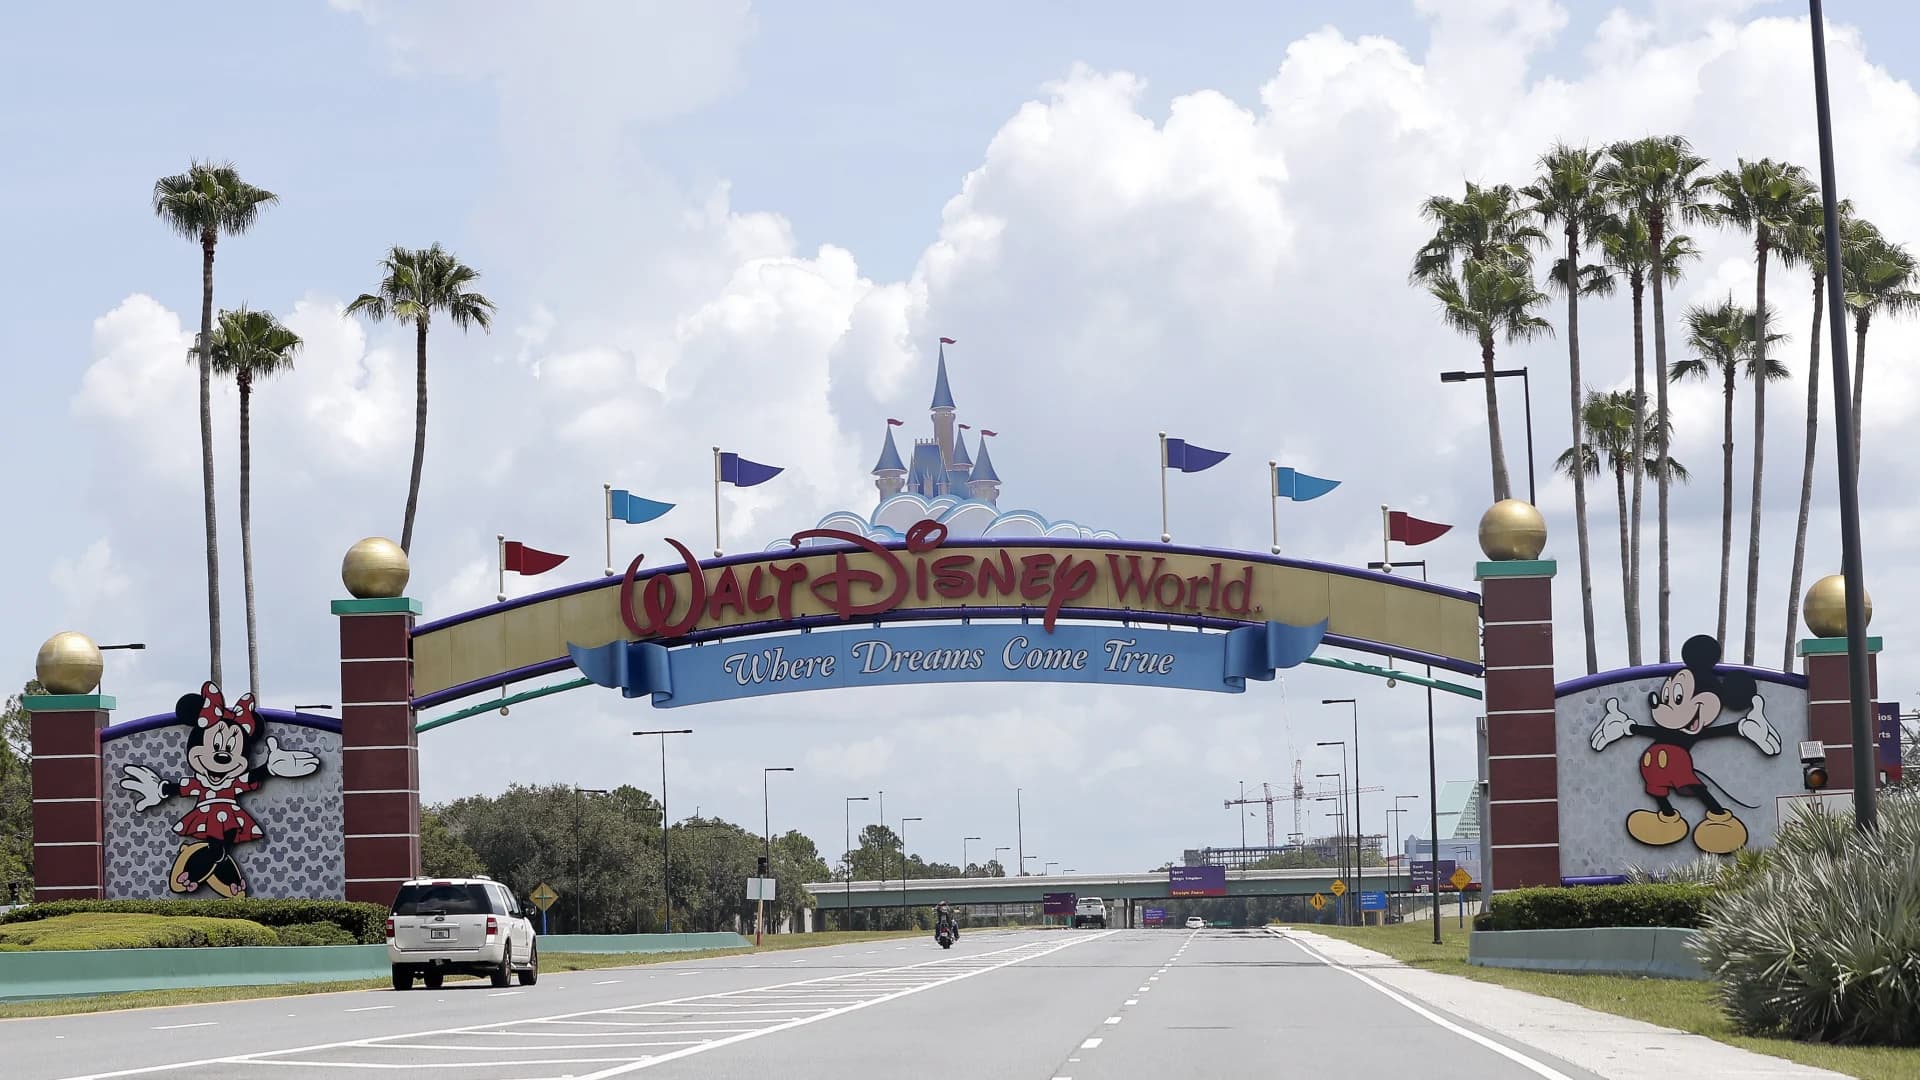 Disney to lay off 28,000 at its parks in California, Florida